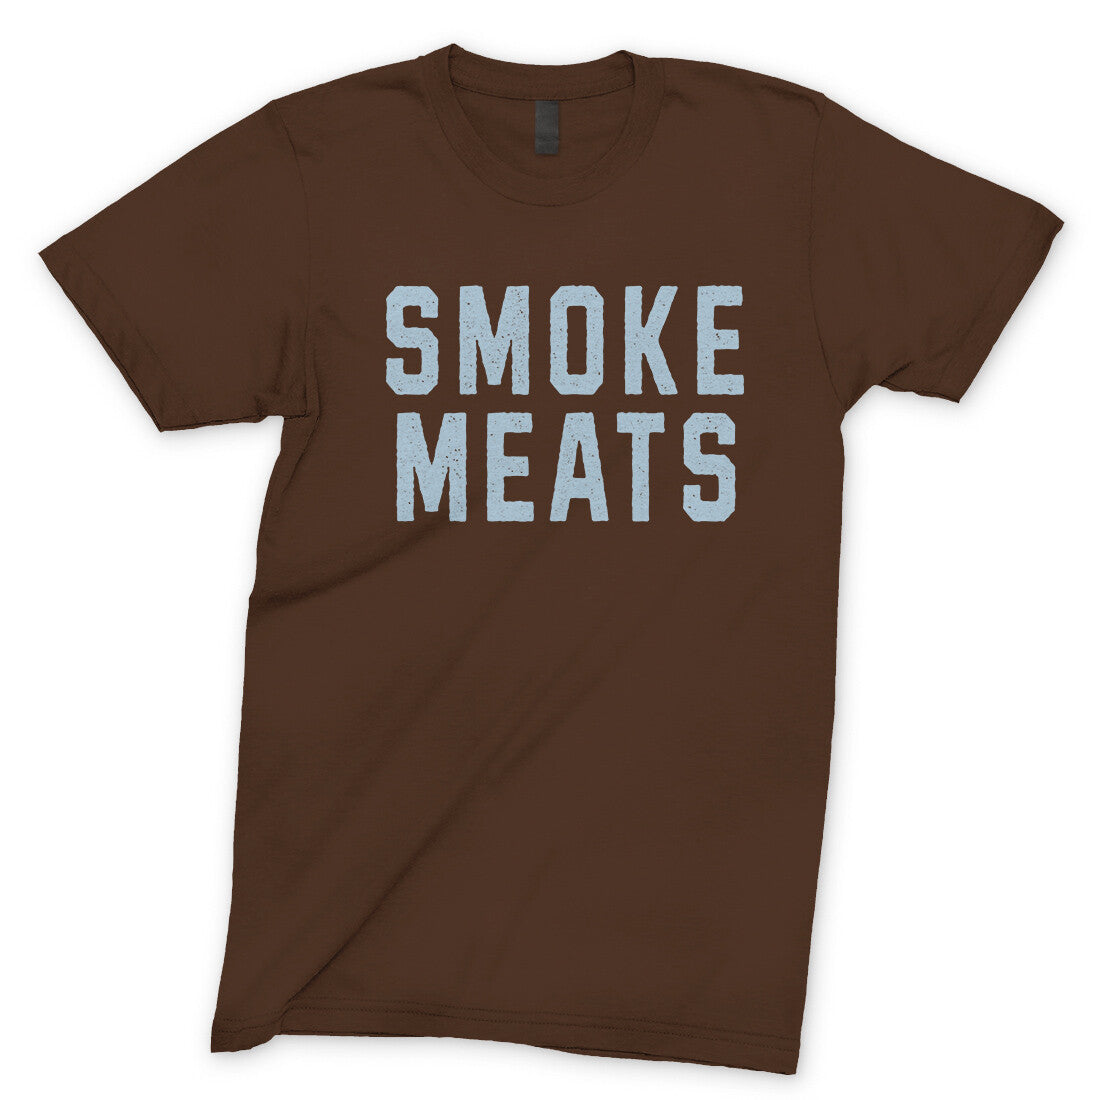 Smoke Meats in Dark Chocolate Color